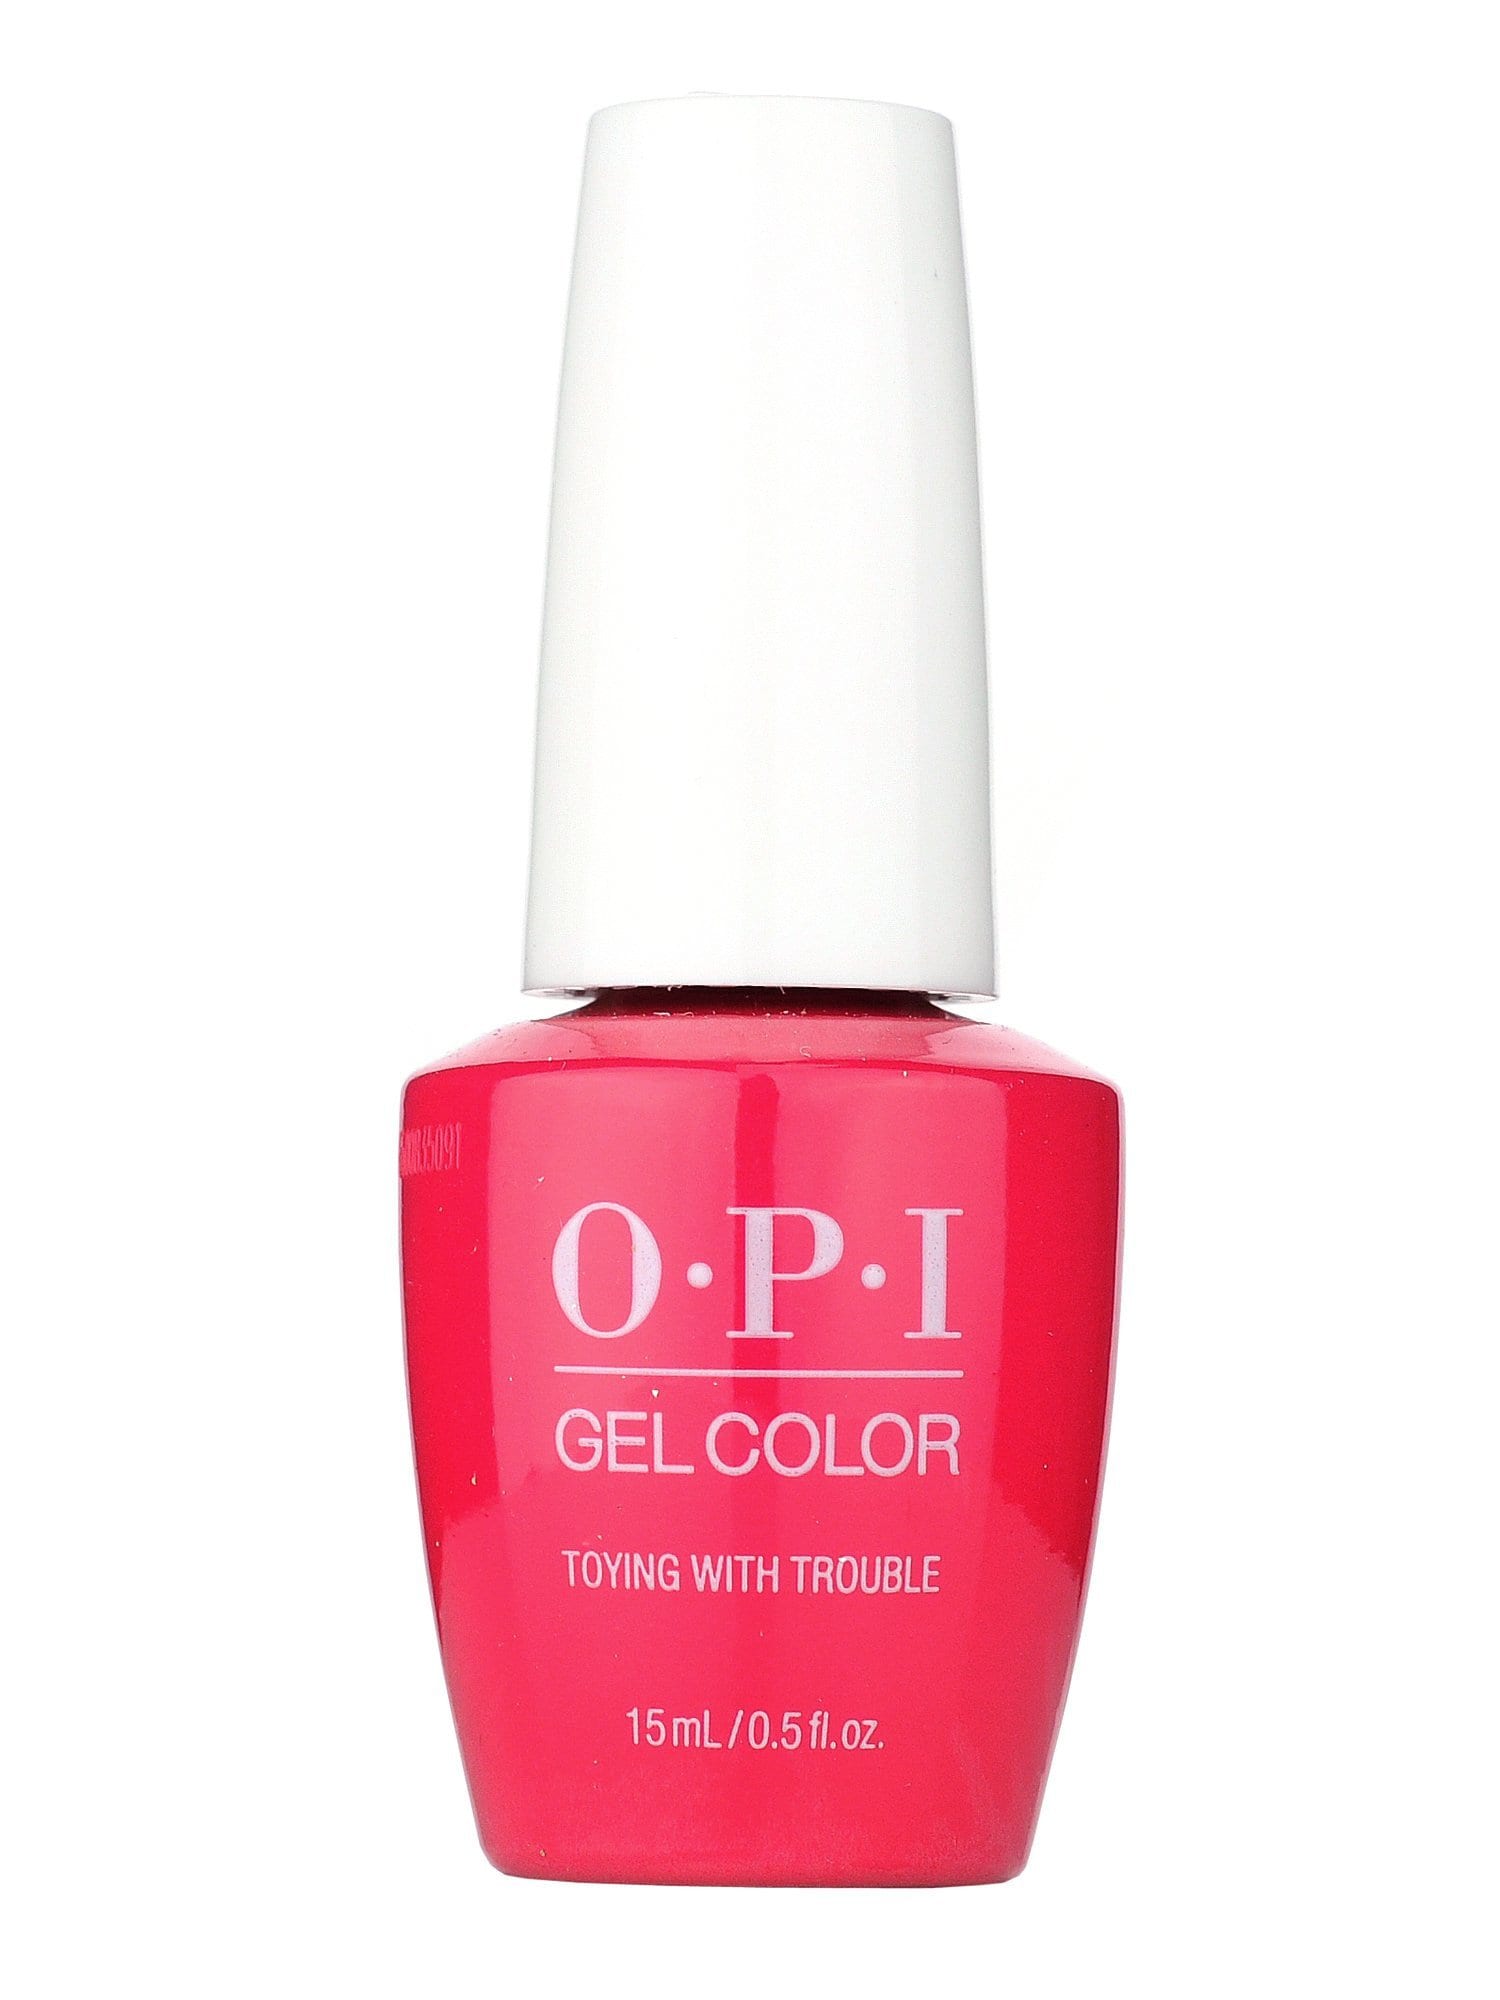 OPI, OPI GelColor - Toying With Trouble - Nutcracker Collection, Mk Beauty Club, Gel Polish